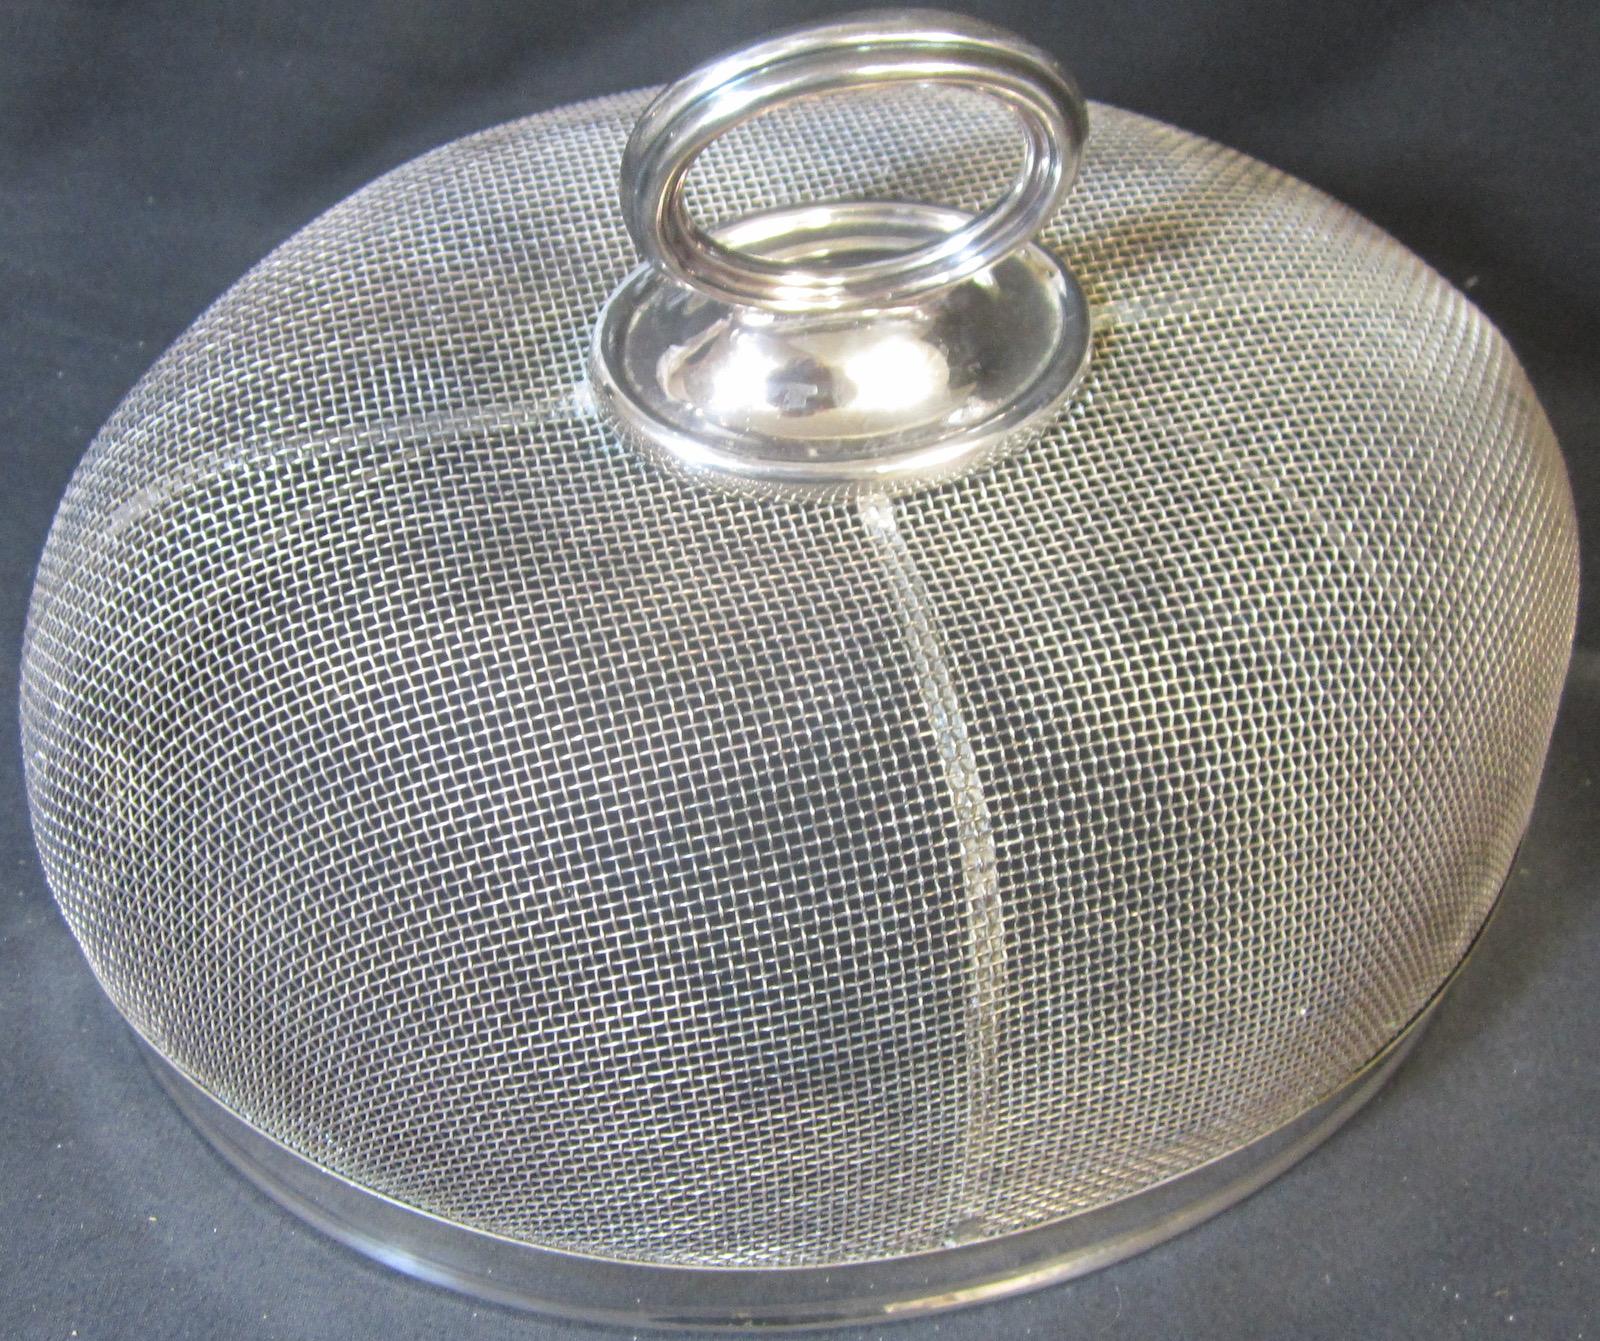 Hardy Bros, silver plated food cover.
This item was made in England for Australian retailer Hardy Bros.
Hardy Brothers was a specialty retailer and private company of fine jewellery, timepieces and decorative arts in Australia. Its historic products